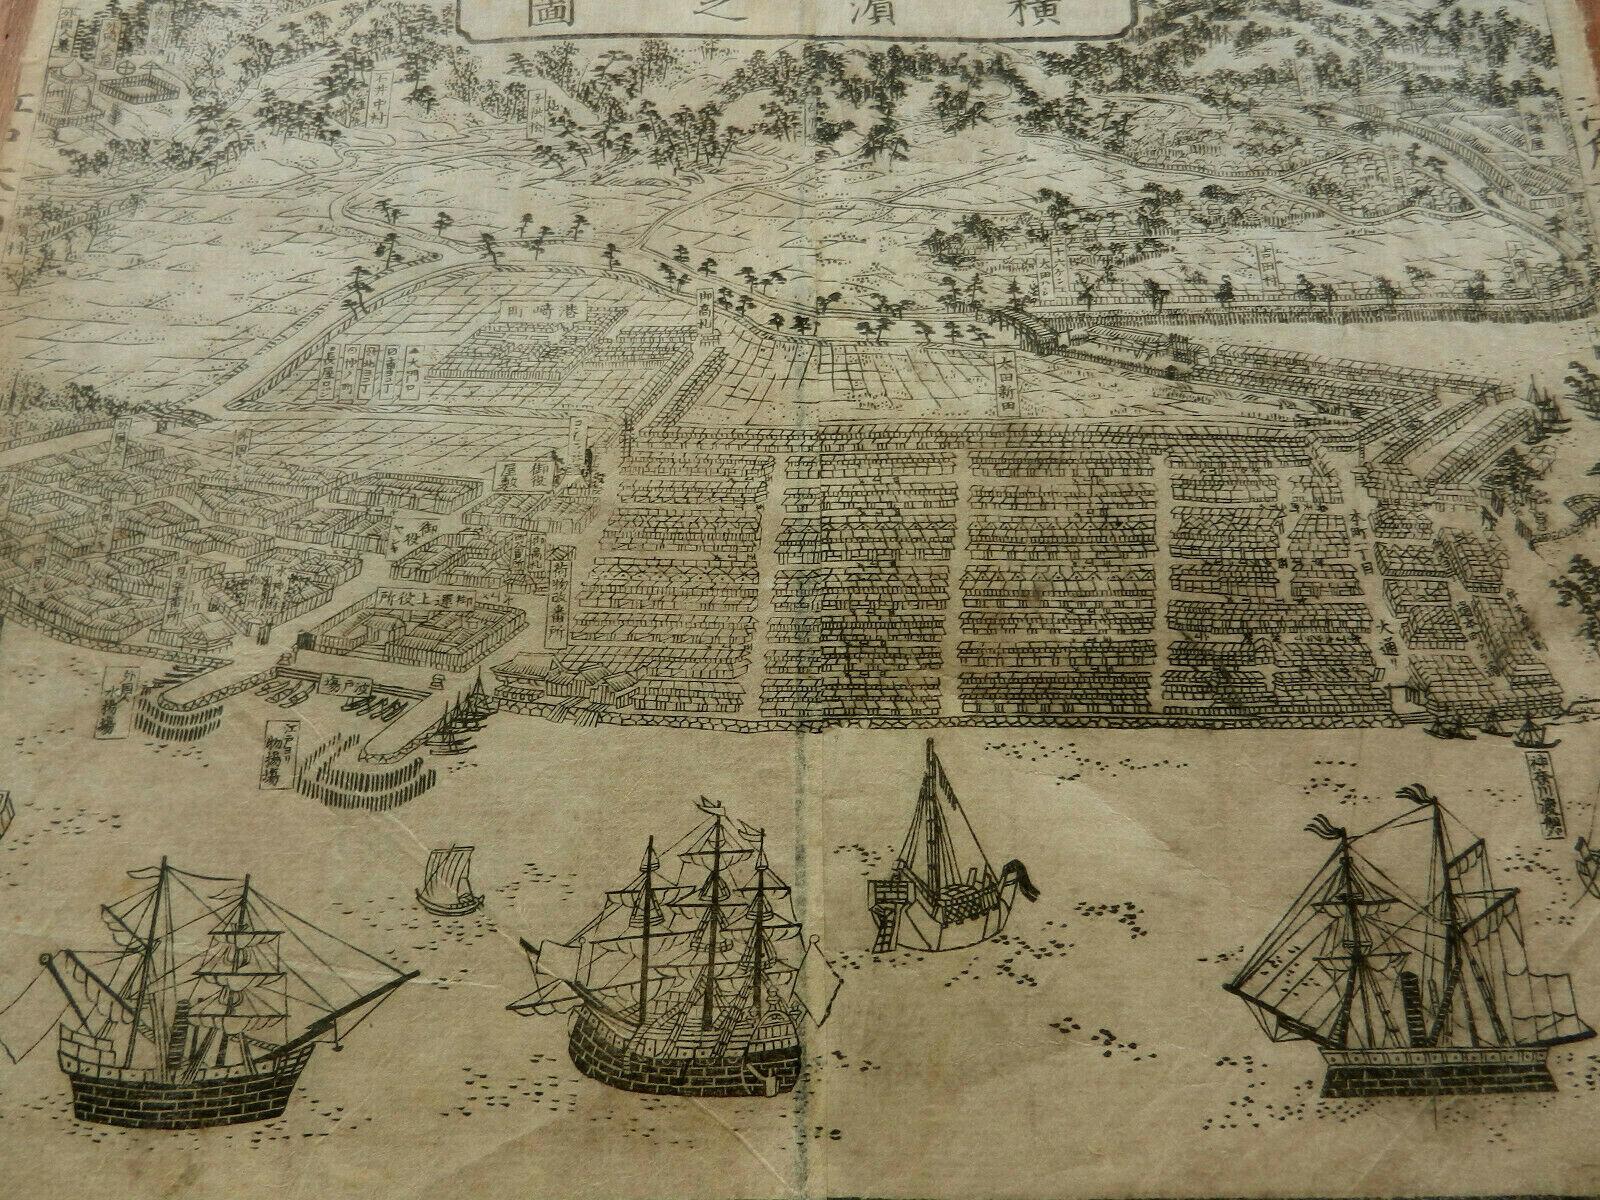 Important Japanese complete antique woodblock print map of view of Yokohama, 1861.

Hard to find view and map

This is one of the earliest maps of Yokohama harbor depicting American, British, Russian and European foreign trade ships, and western